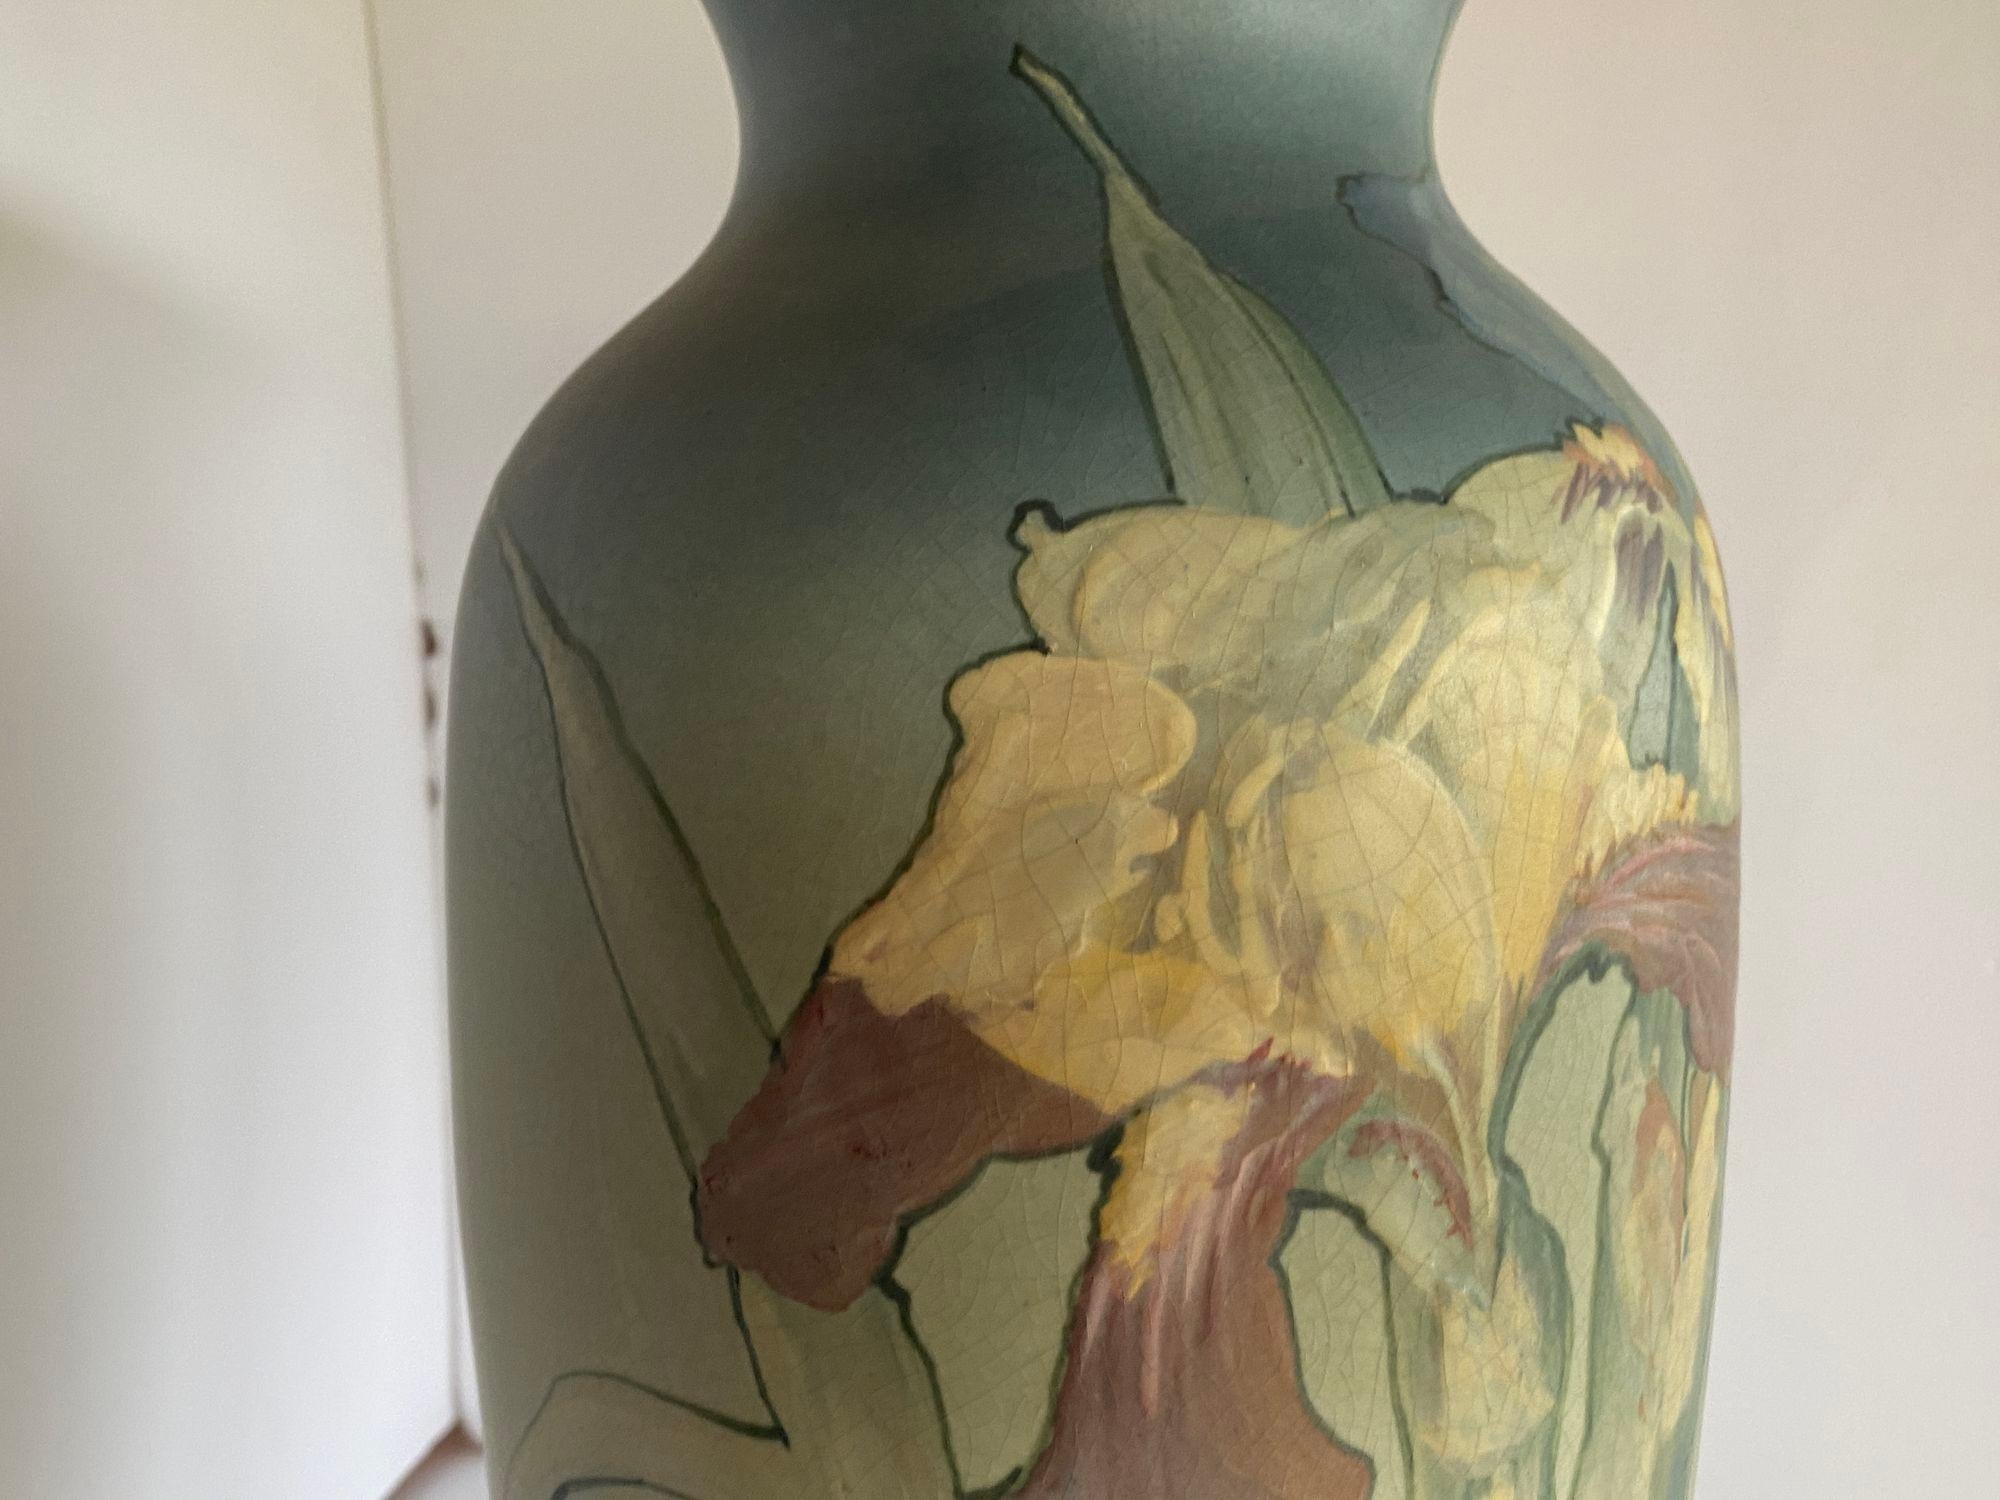 Early 20th Century Art Nouveau Hand-Painted Art Pottery Vase by Weller Pottery For Sale